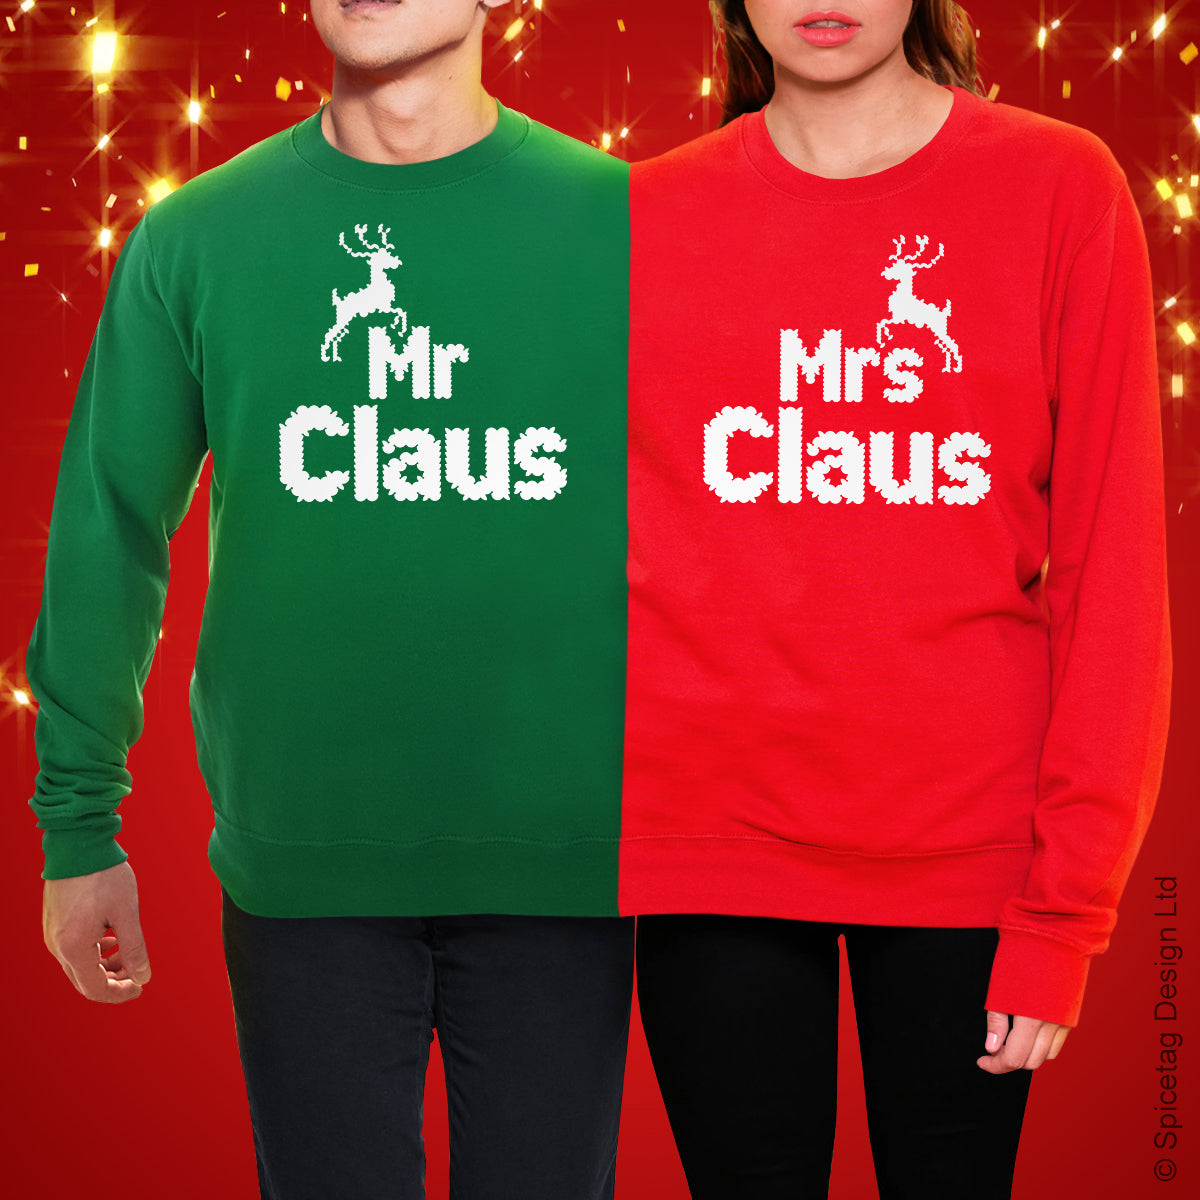 Mr And Mrs Claus Double Christmas Jumper